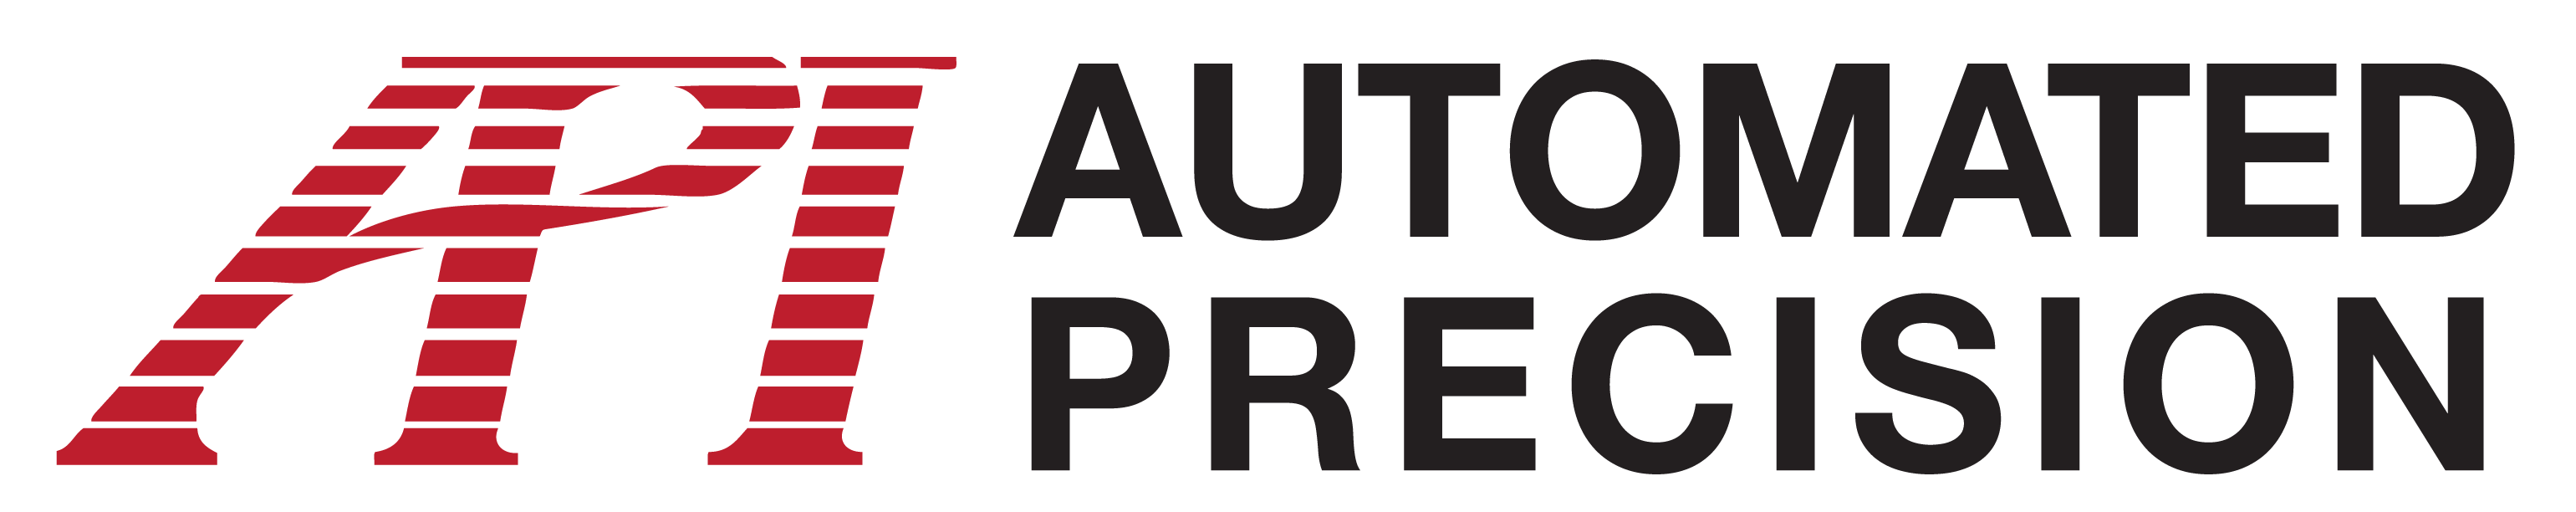 2015-automated-precision-logo-02.png